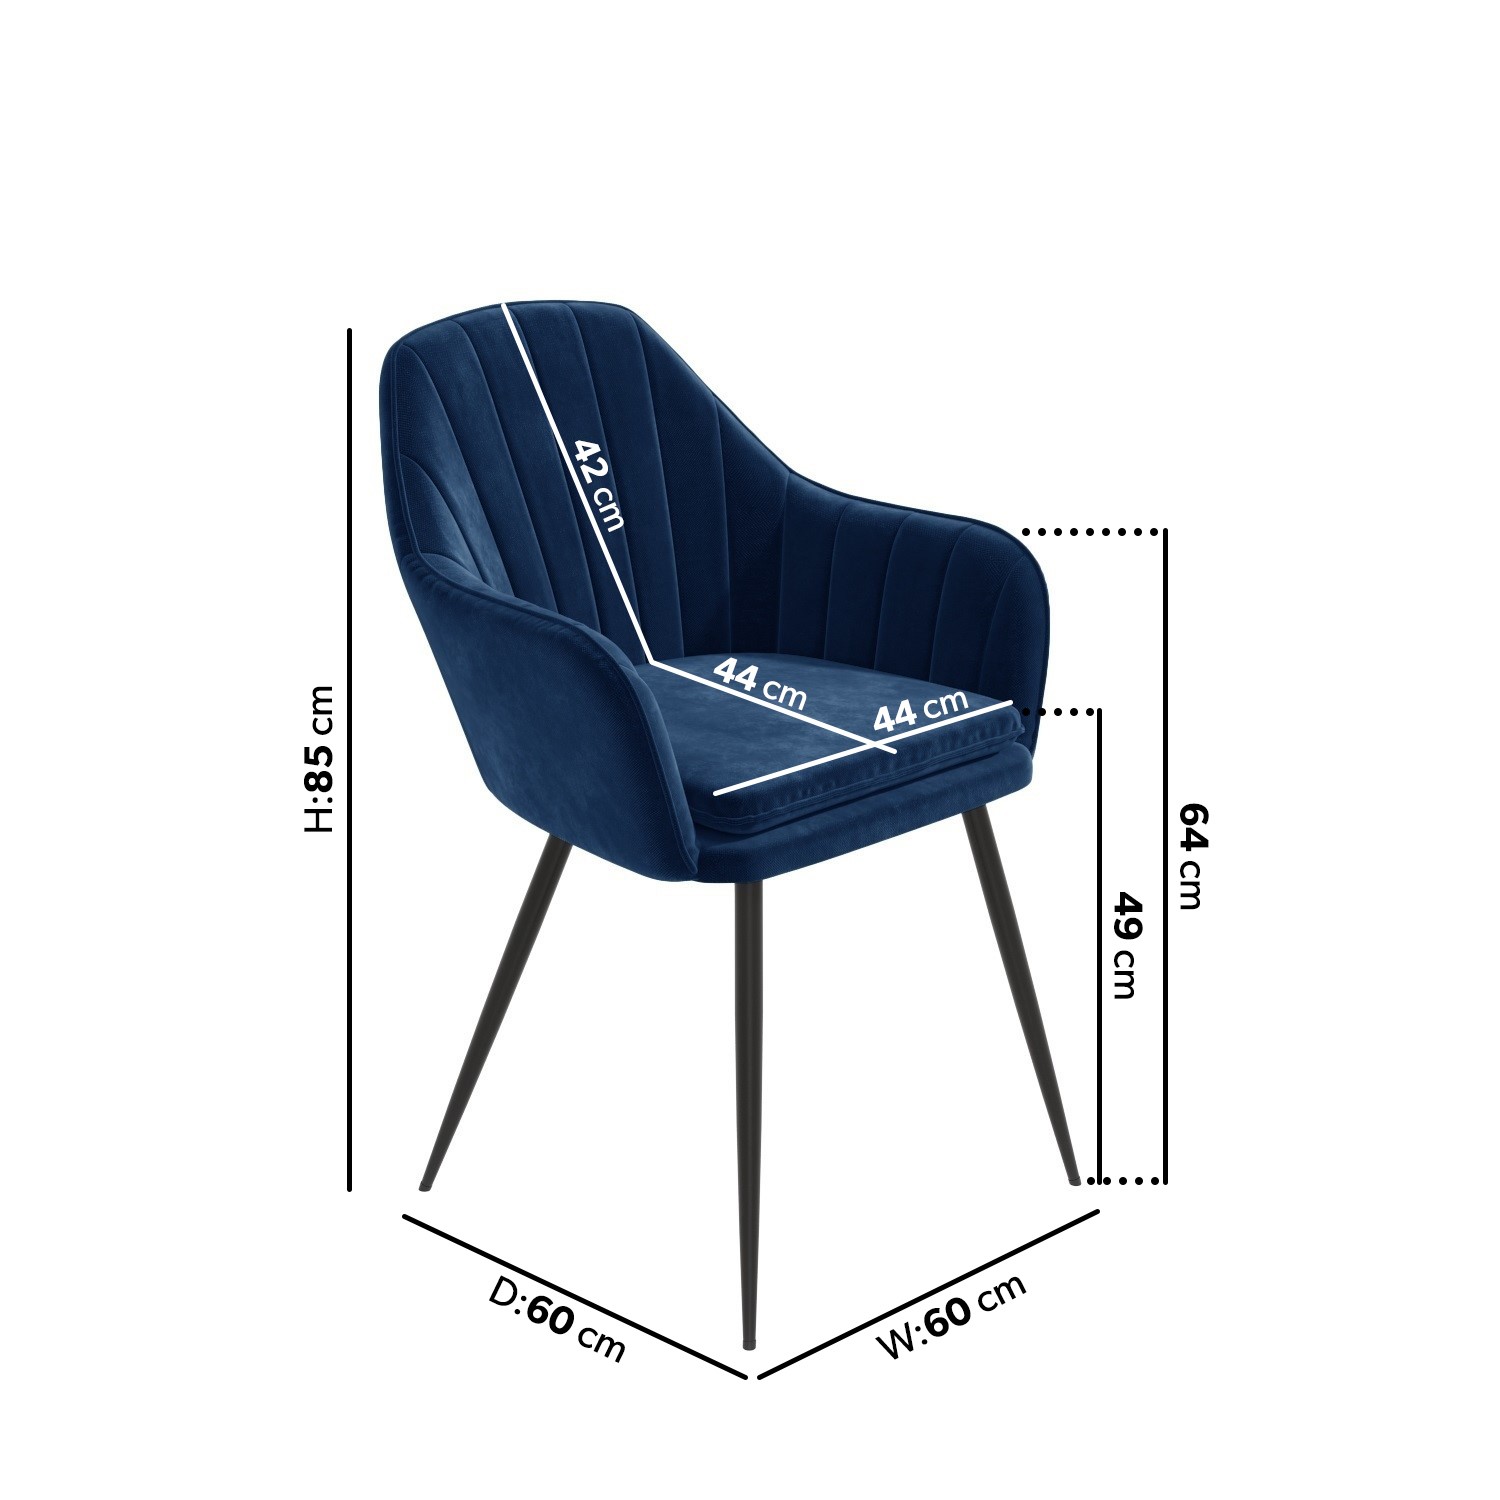 Read more about Set of 2 navy blue velvet tub dining chairs logan